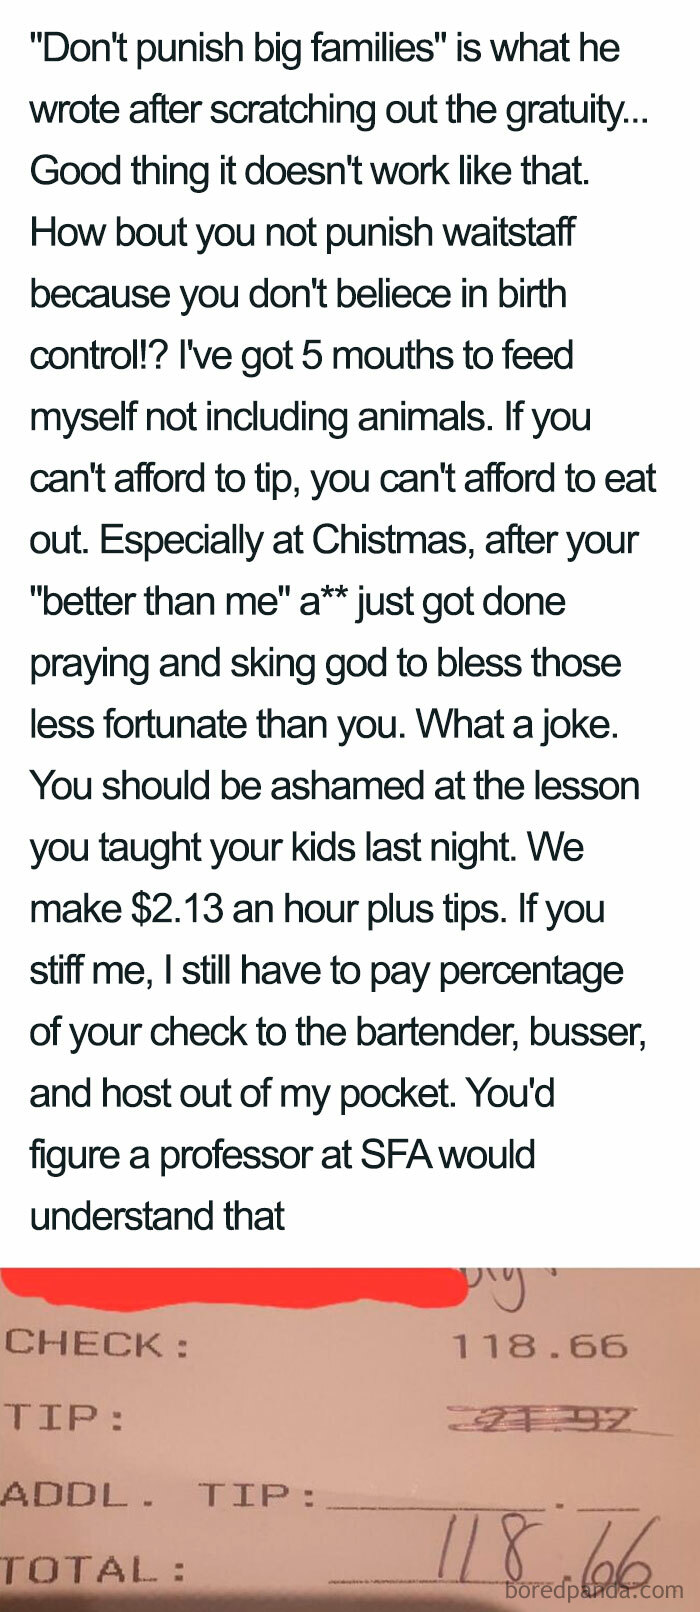 If You Can’t Afford To Tip, You Can’t Afford To Eat Out